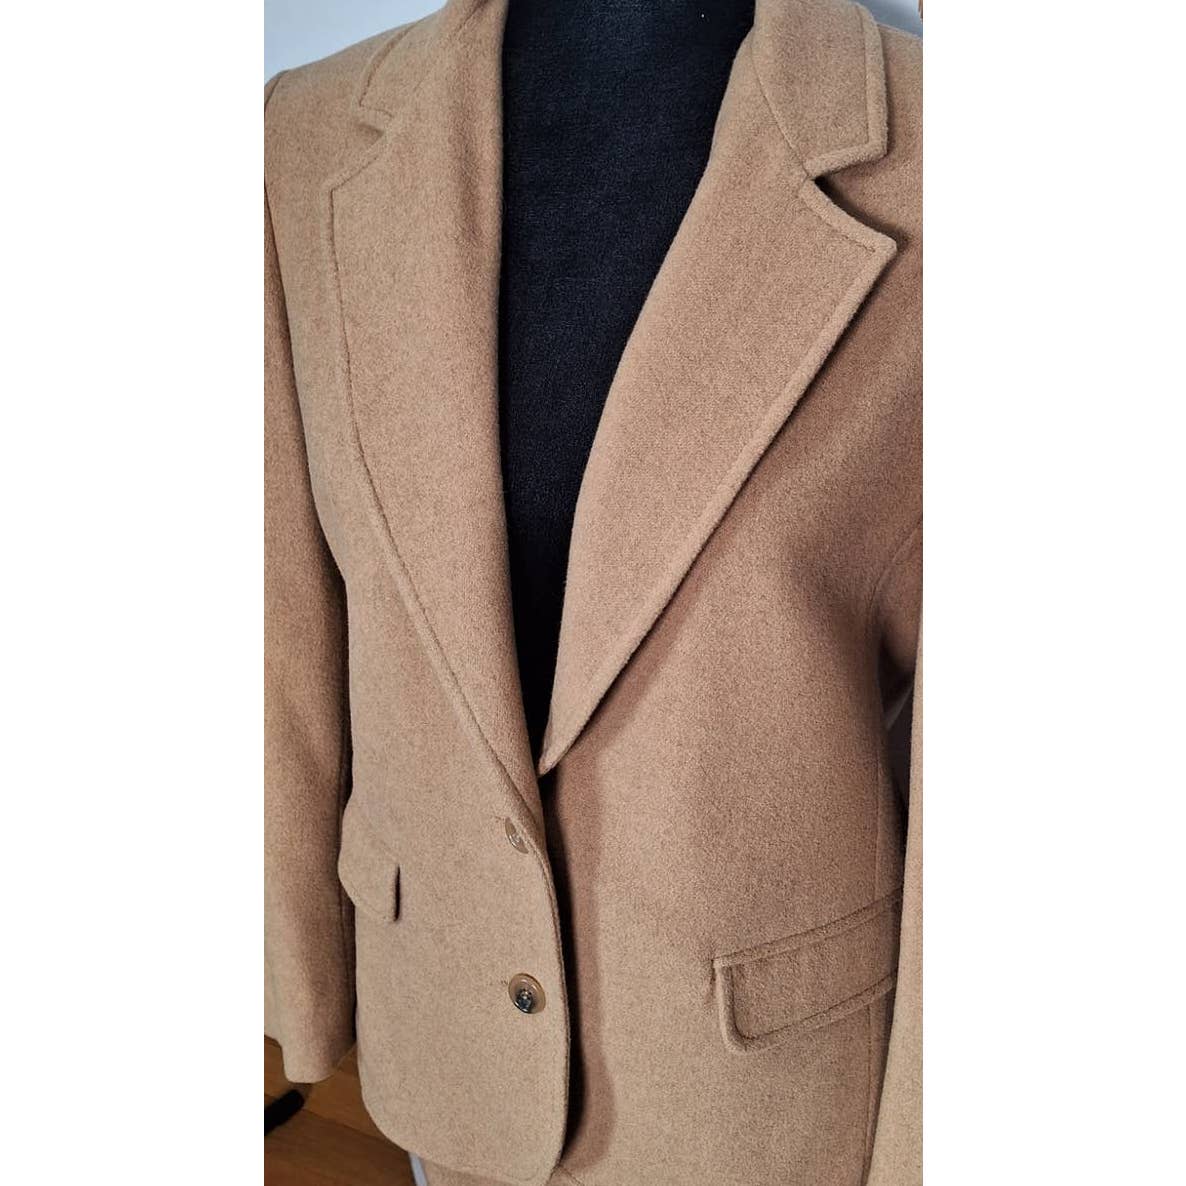 70s/80s Camel Hair/Wool Tailored Skirt Suit Size 6 Small to Medium - themallvintage The Mall Vintage